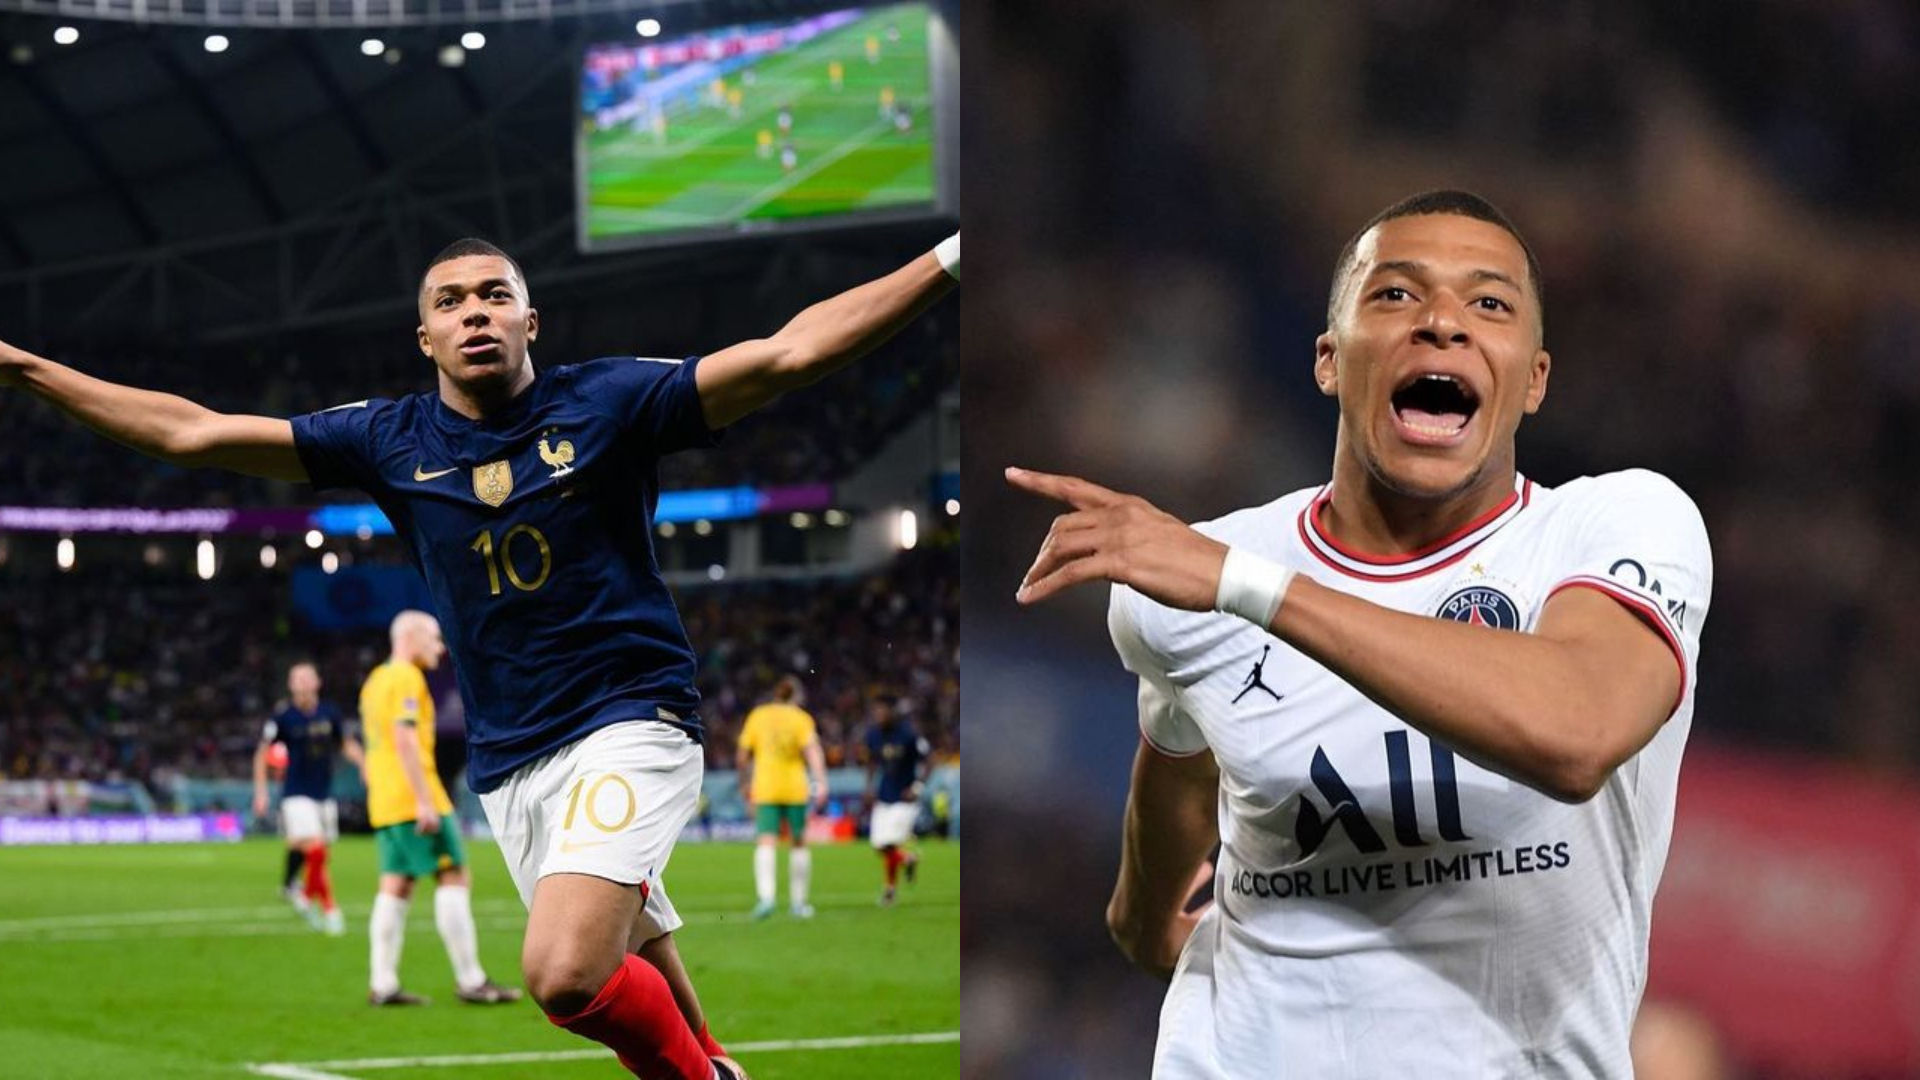 Kylian Mbappe transfer: Kylian Mbappe of PSG to sign biggest transfer deal  of football history at $1.1 billion with Al-Hilal? What we know so far -  The Economic Times